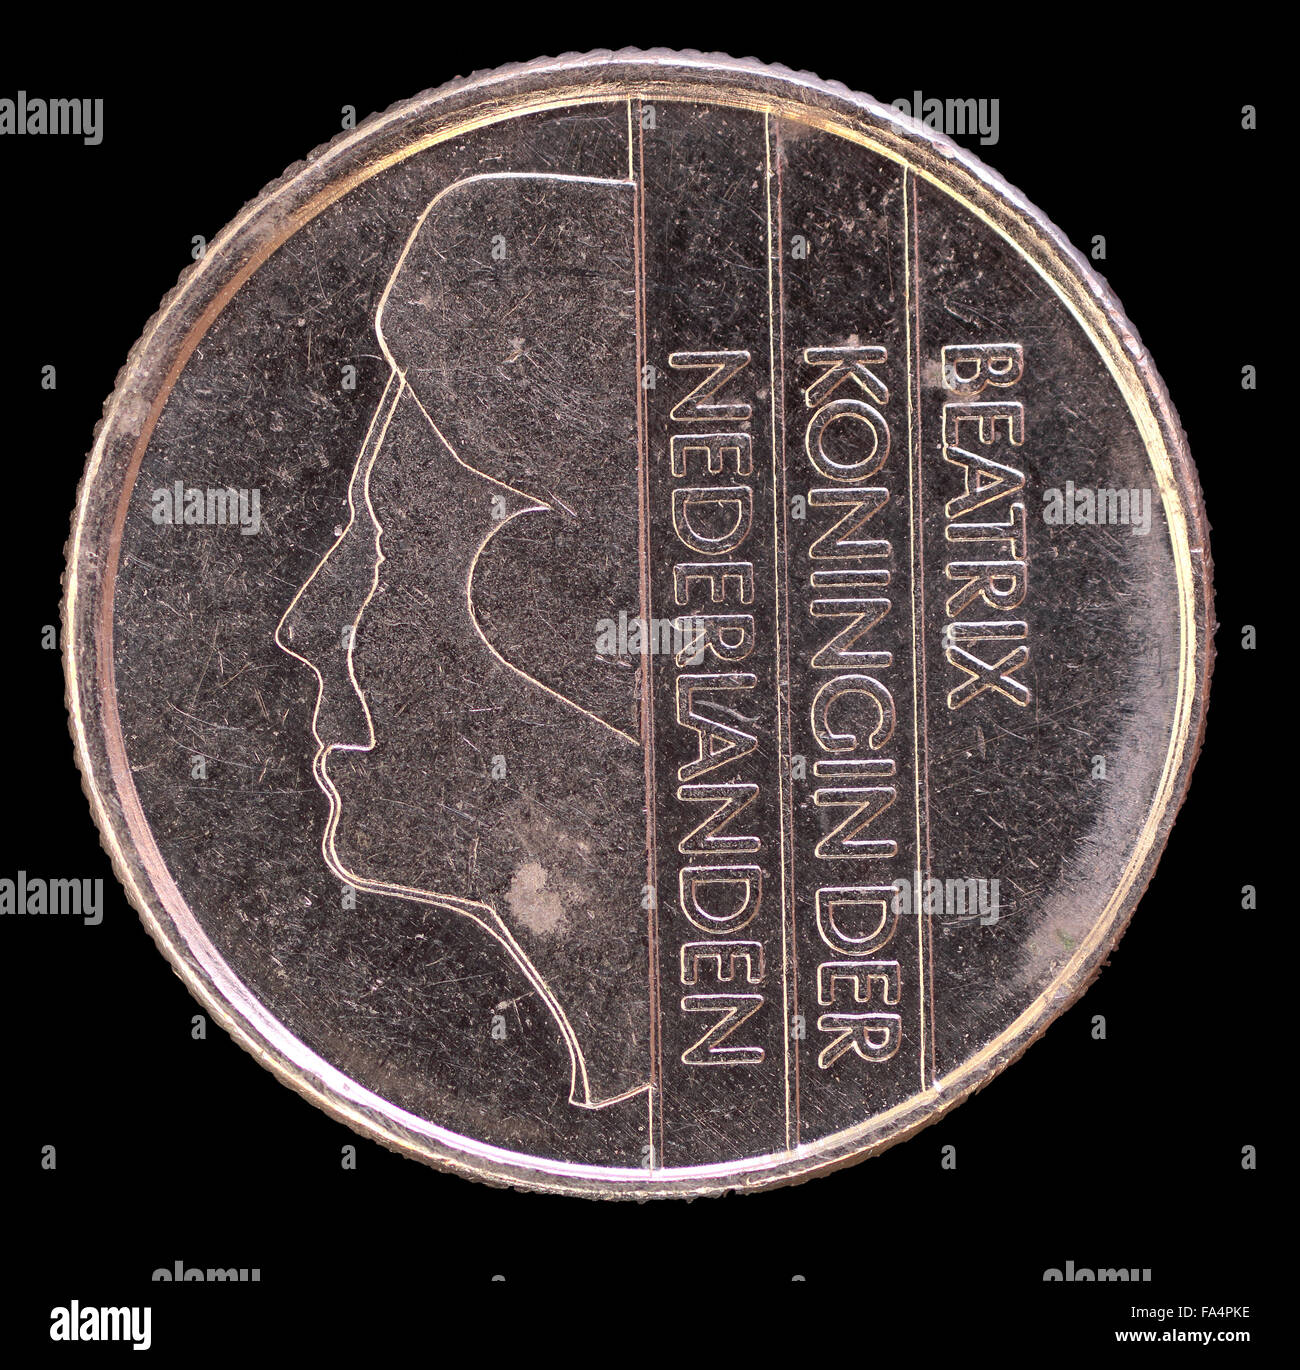 The head face of 25 cents of guilder coin, issued by Netherlands in 1985, depicting the portrait of the Princess Beatrix. Image Stock Photo